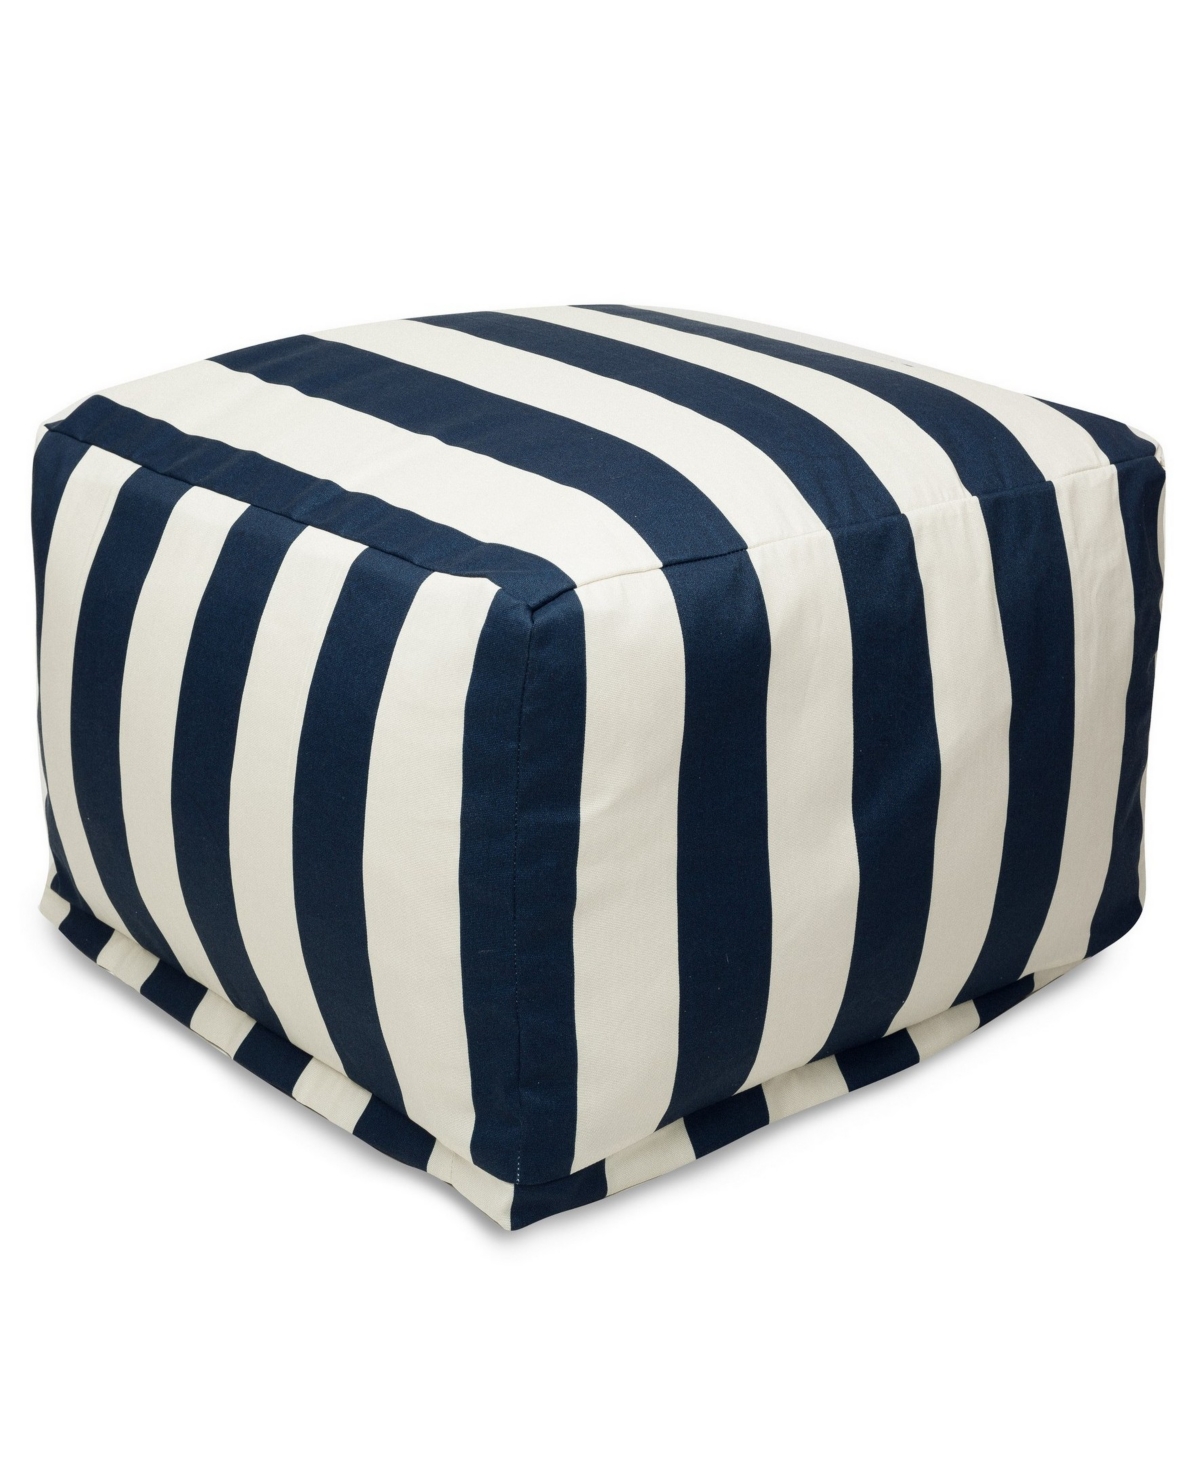 UPC 859072202221 product image for Majestic Home Goods Vertical Stripe Ottoman Square Pouf 27